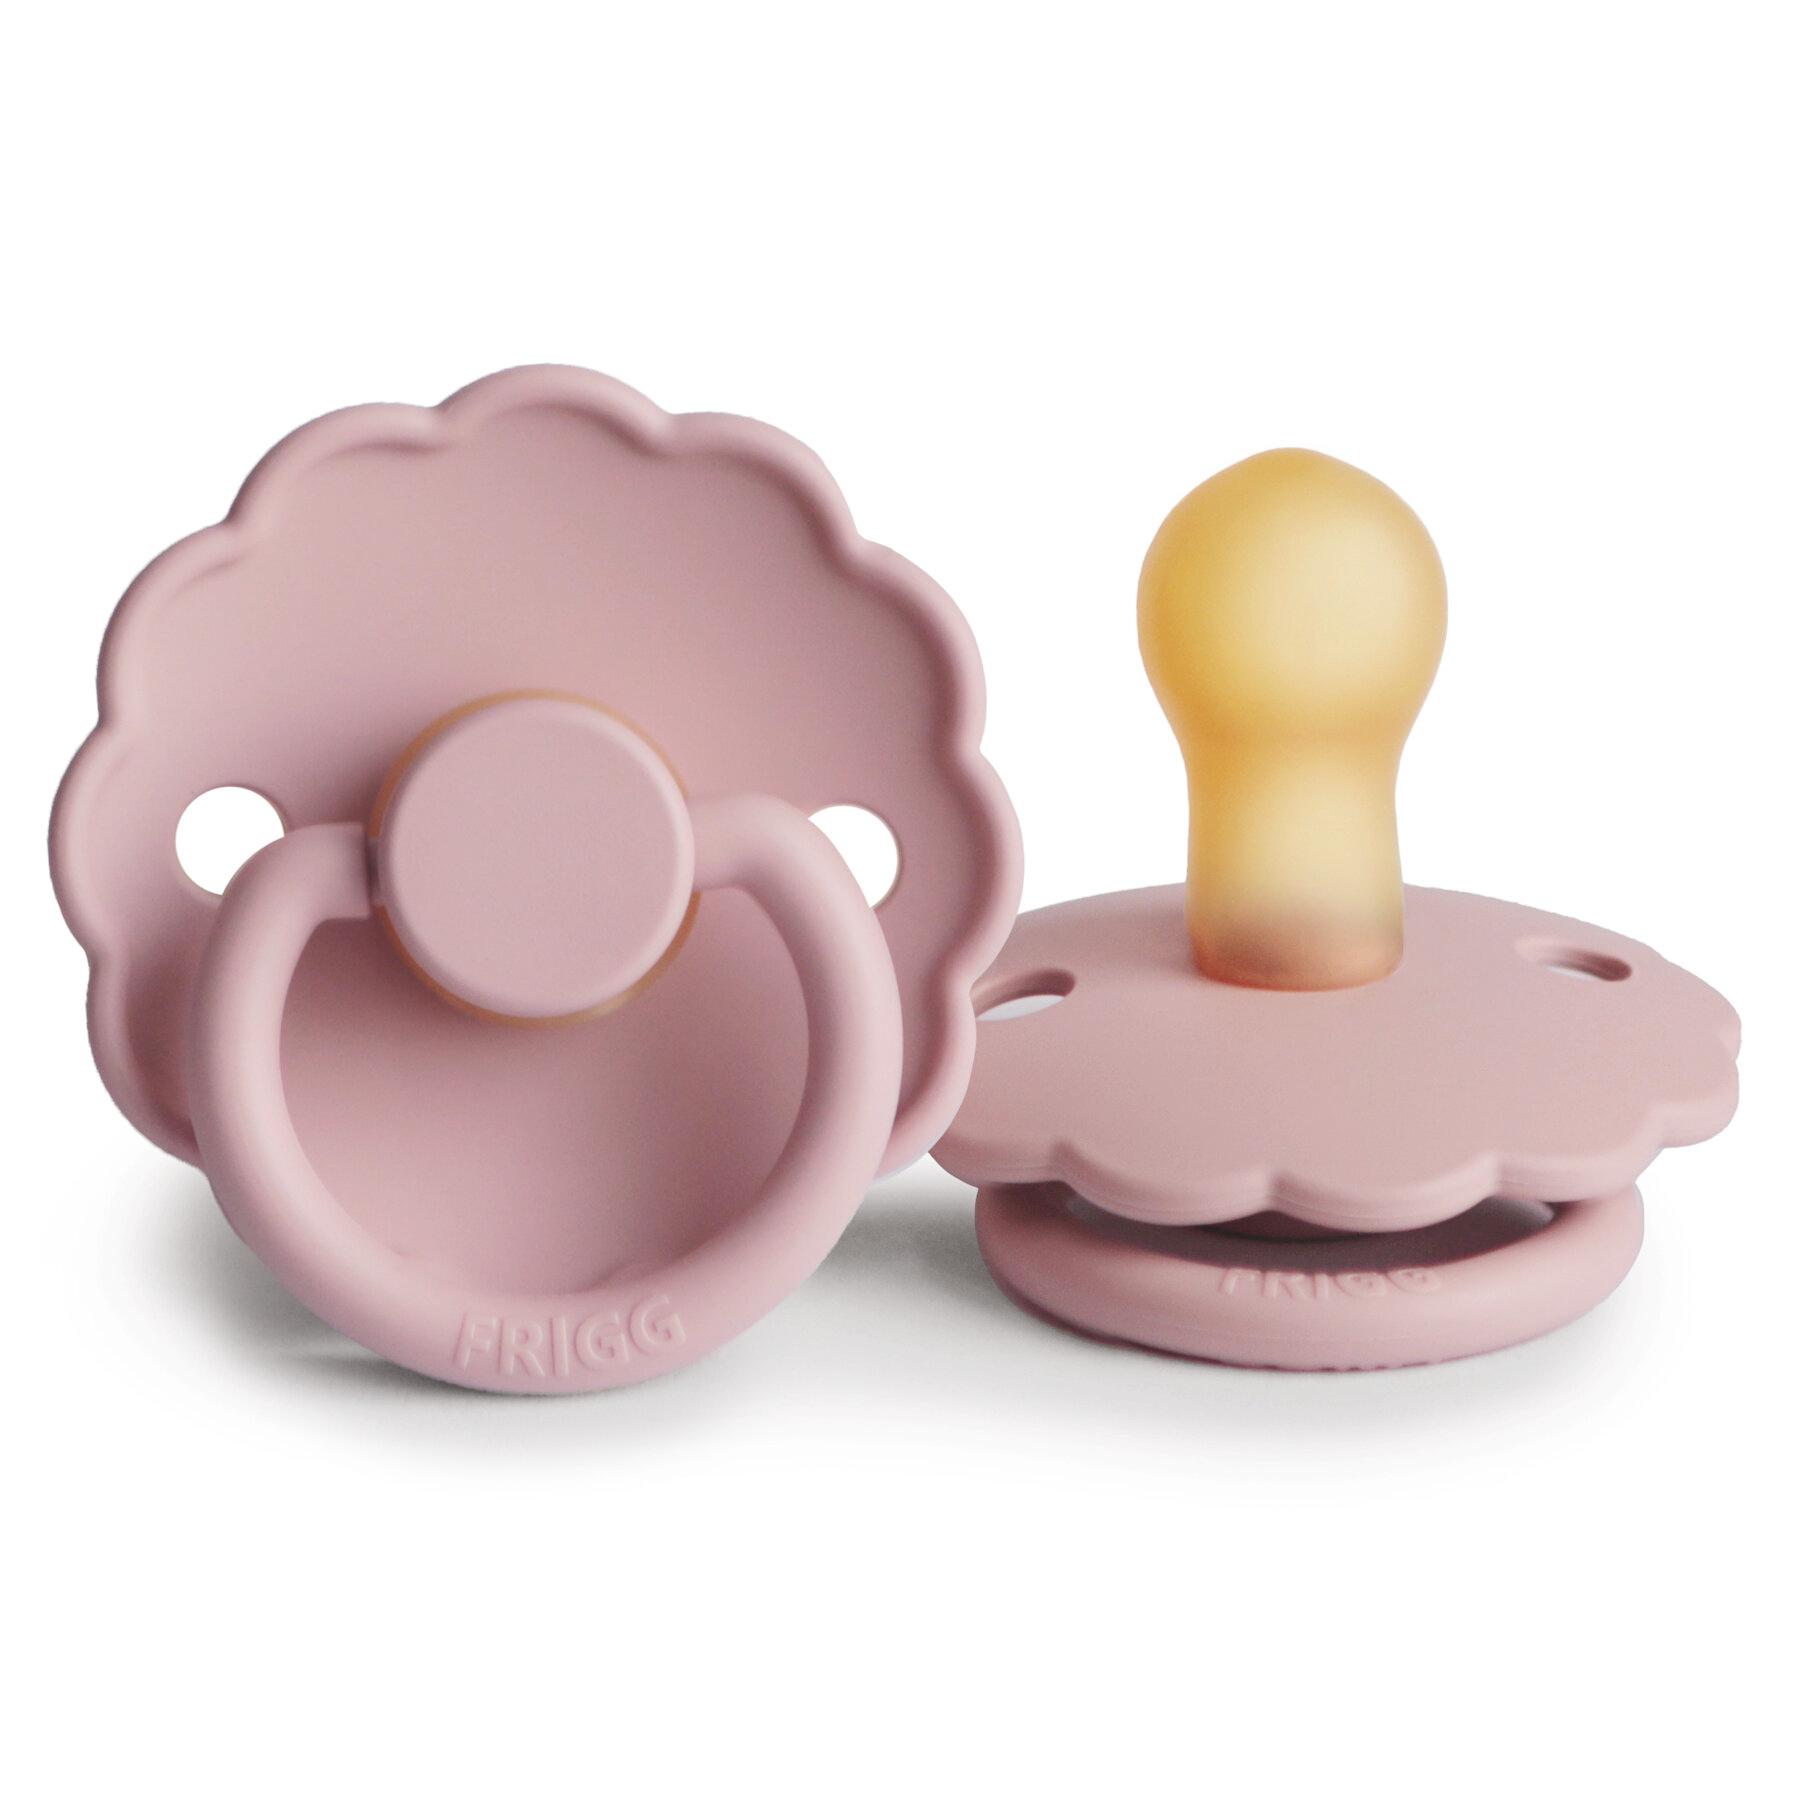 FRIGG Daisy Latex Baby Pacifier (6-18 Months)